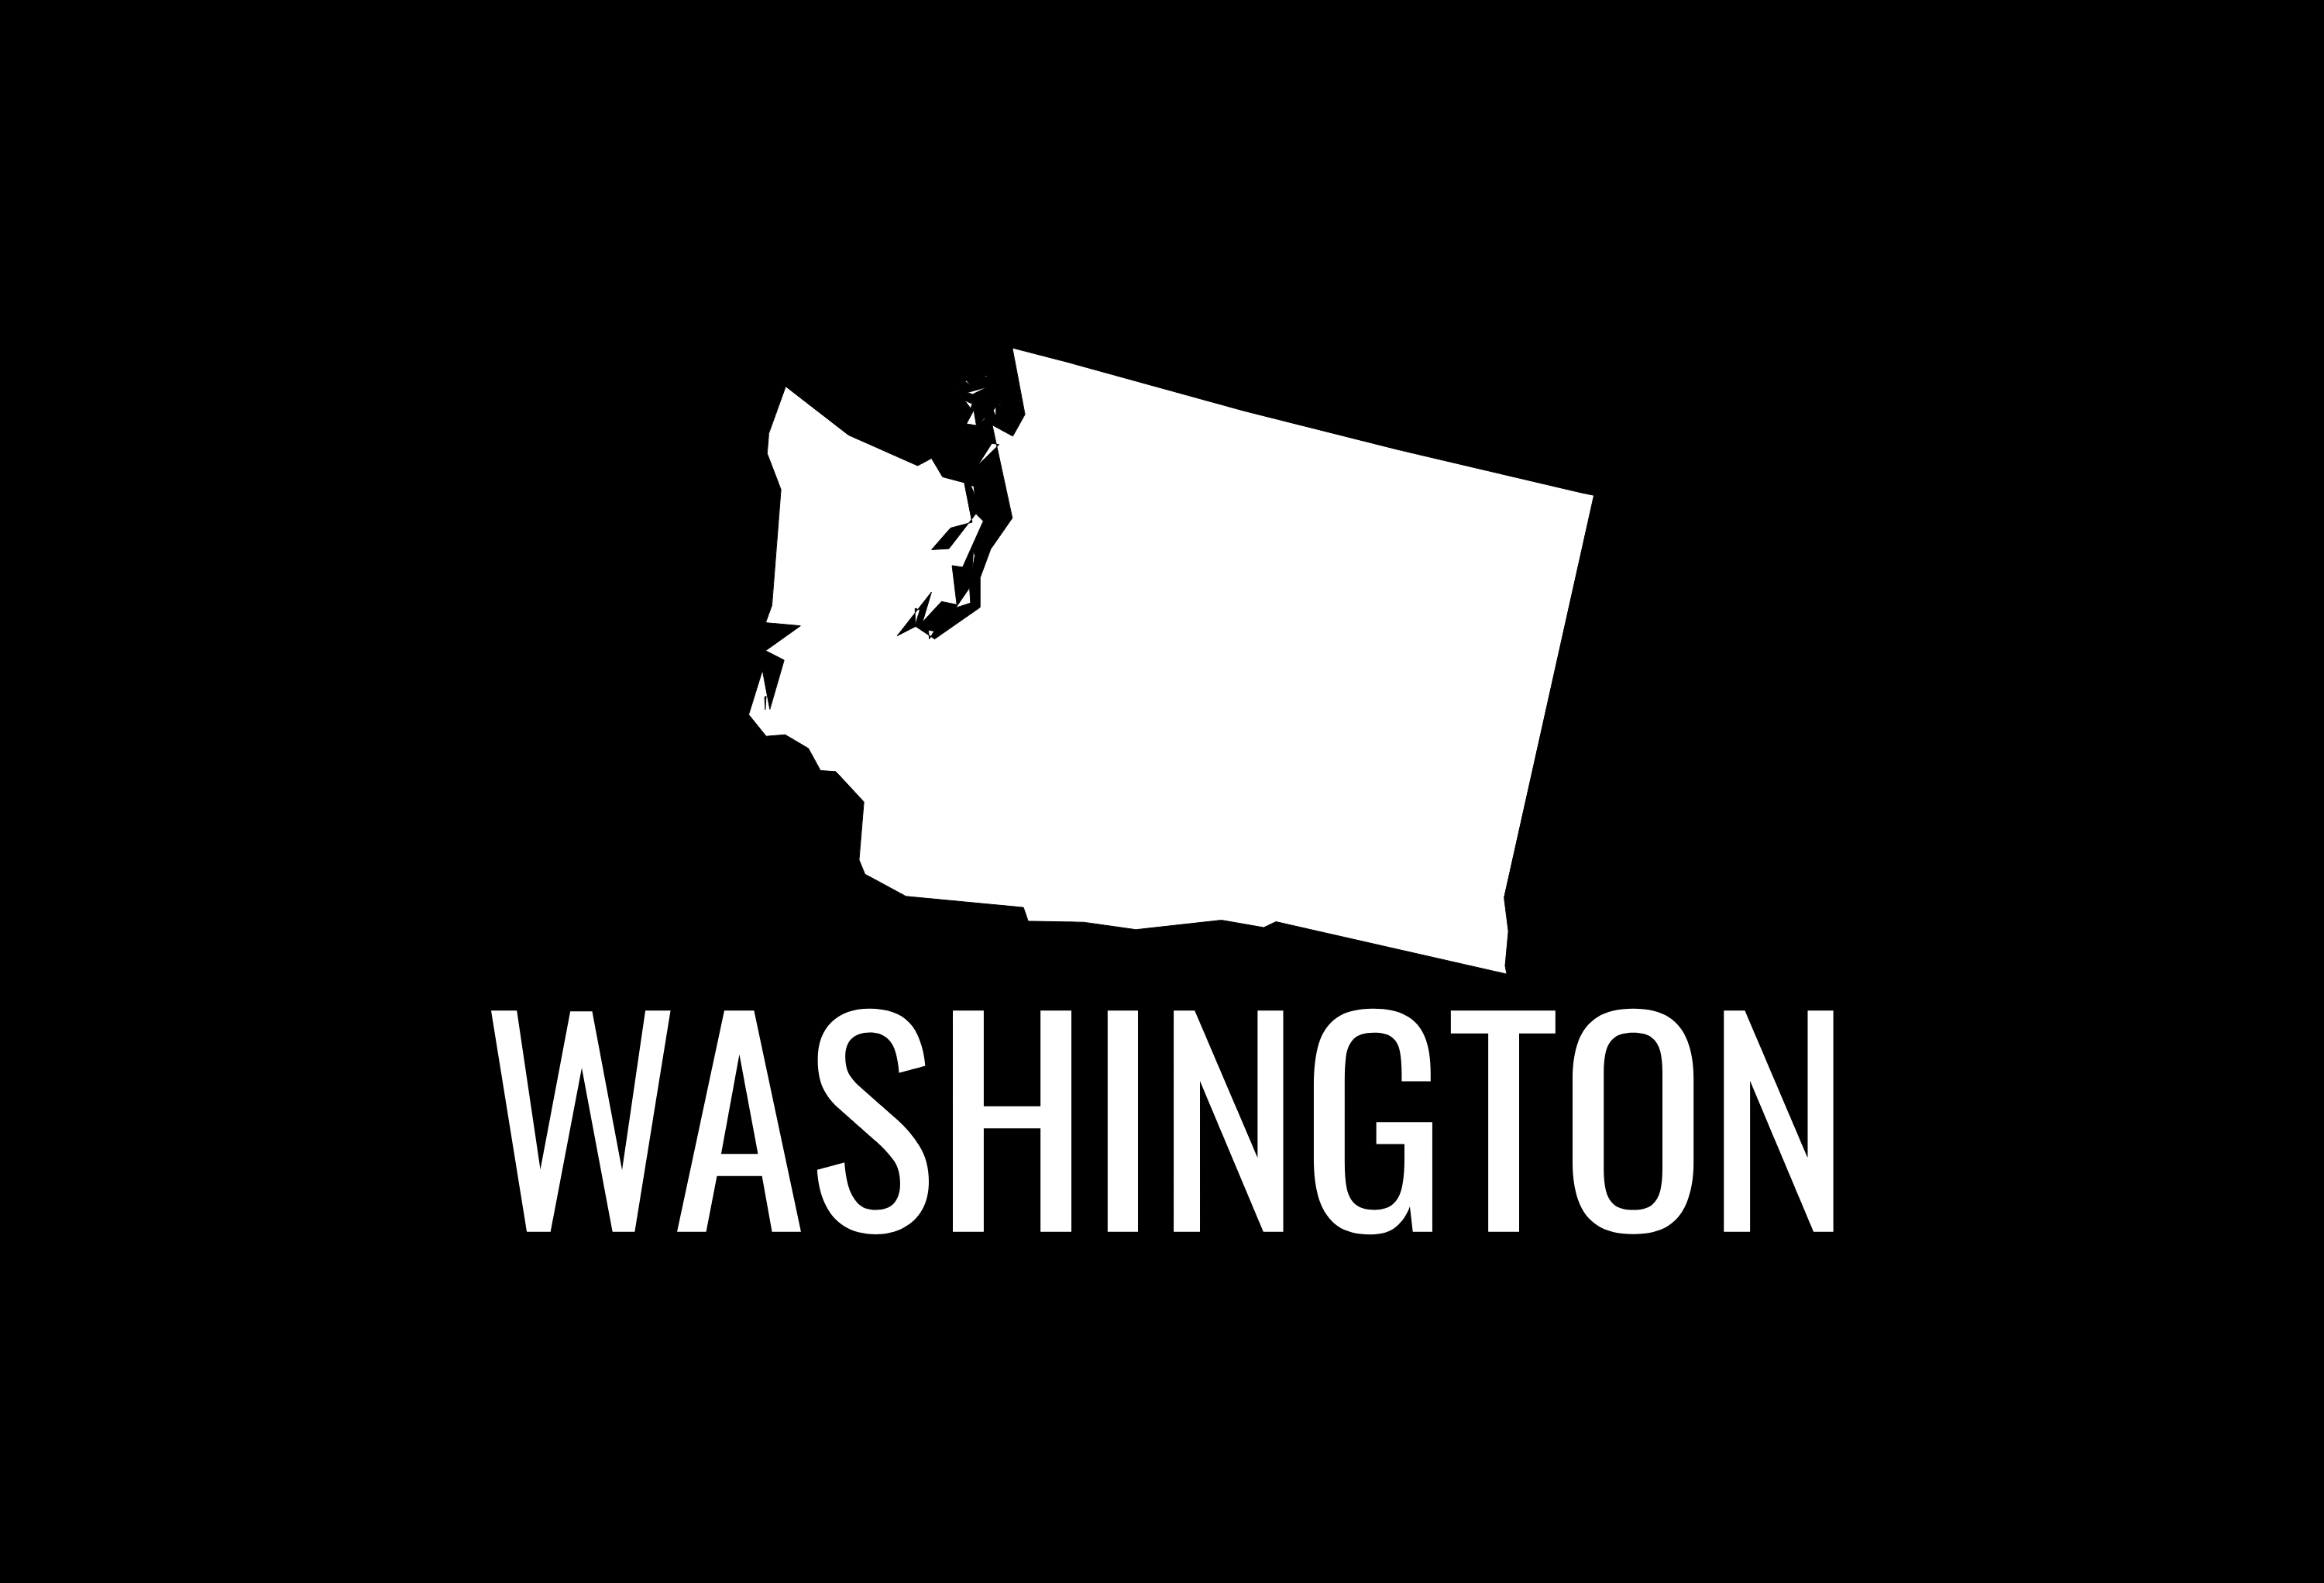 Washington State Map Car Decal - Permanent Vinyl Sticker for Cars, Vehicle, Doors, Windows, Laptop, and more!